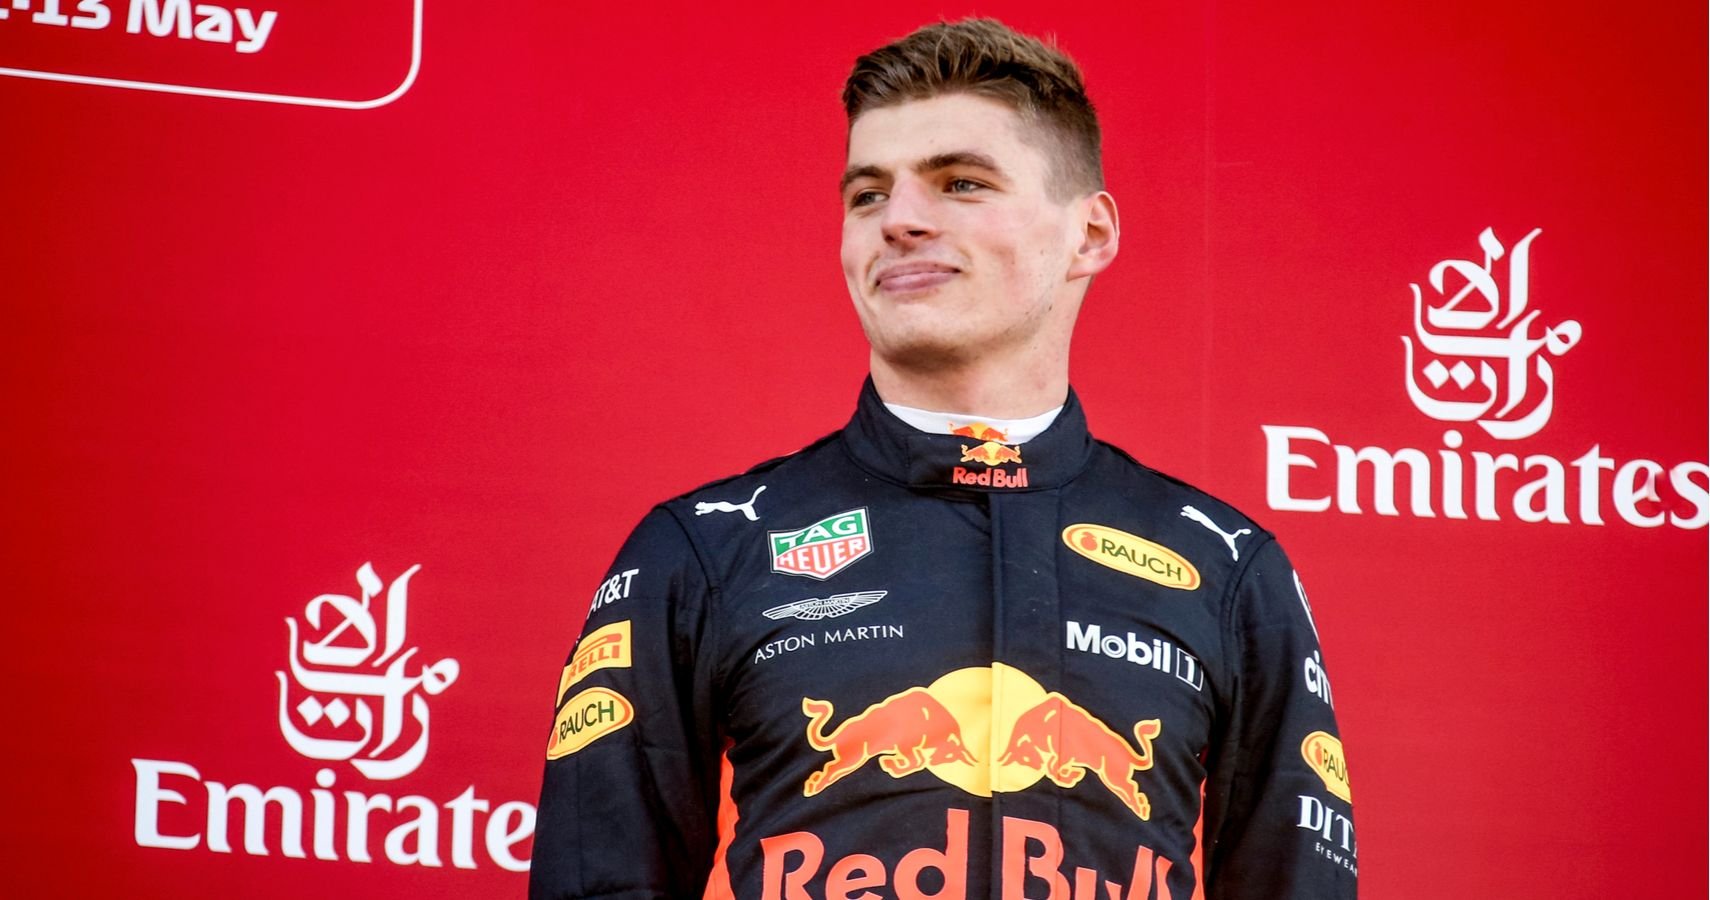 Here's How Max Verstappen Became An F1 Star | TheRichest.com